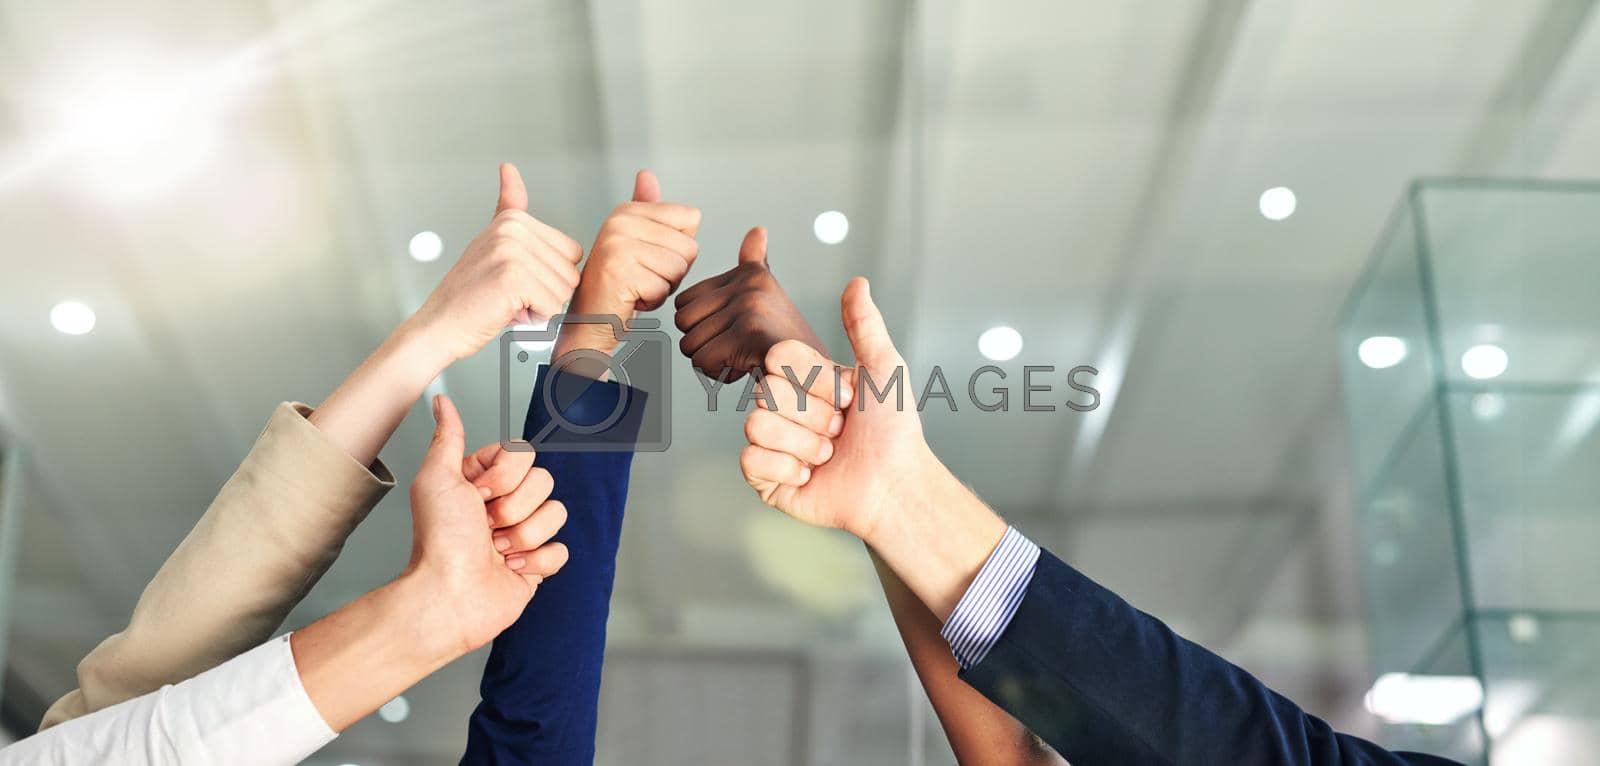 Royalty free image of Thumbs up to success. Shot of a group of hands showing thumbs up in an office. by YuriArcurs